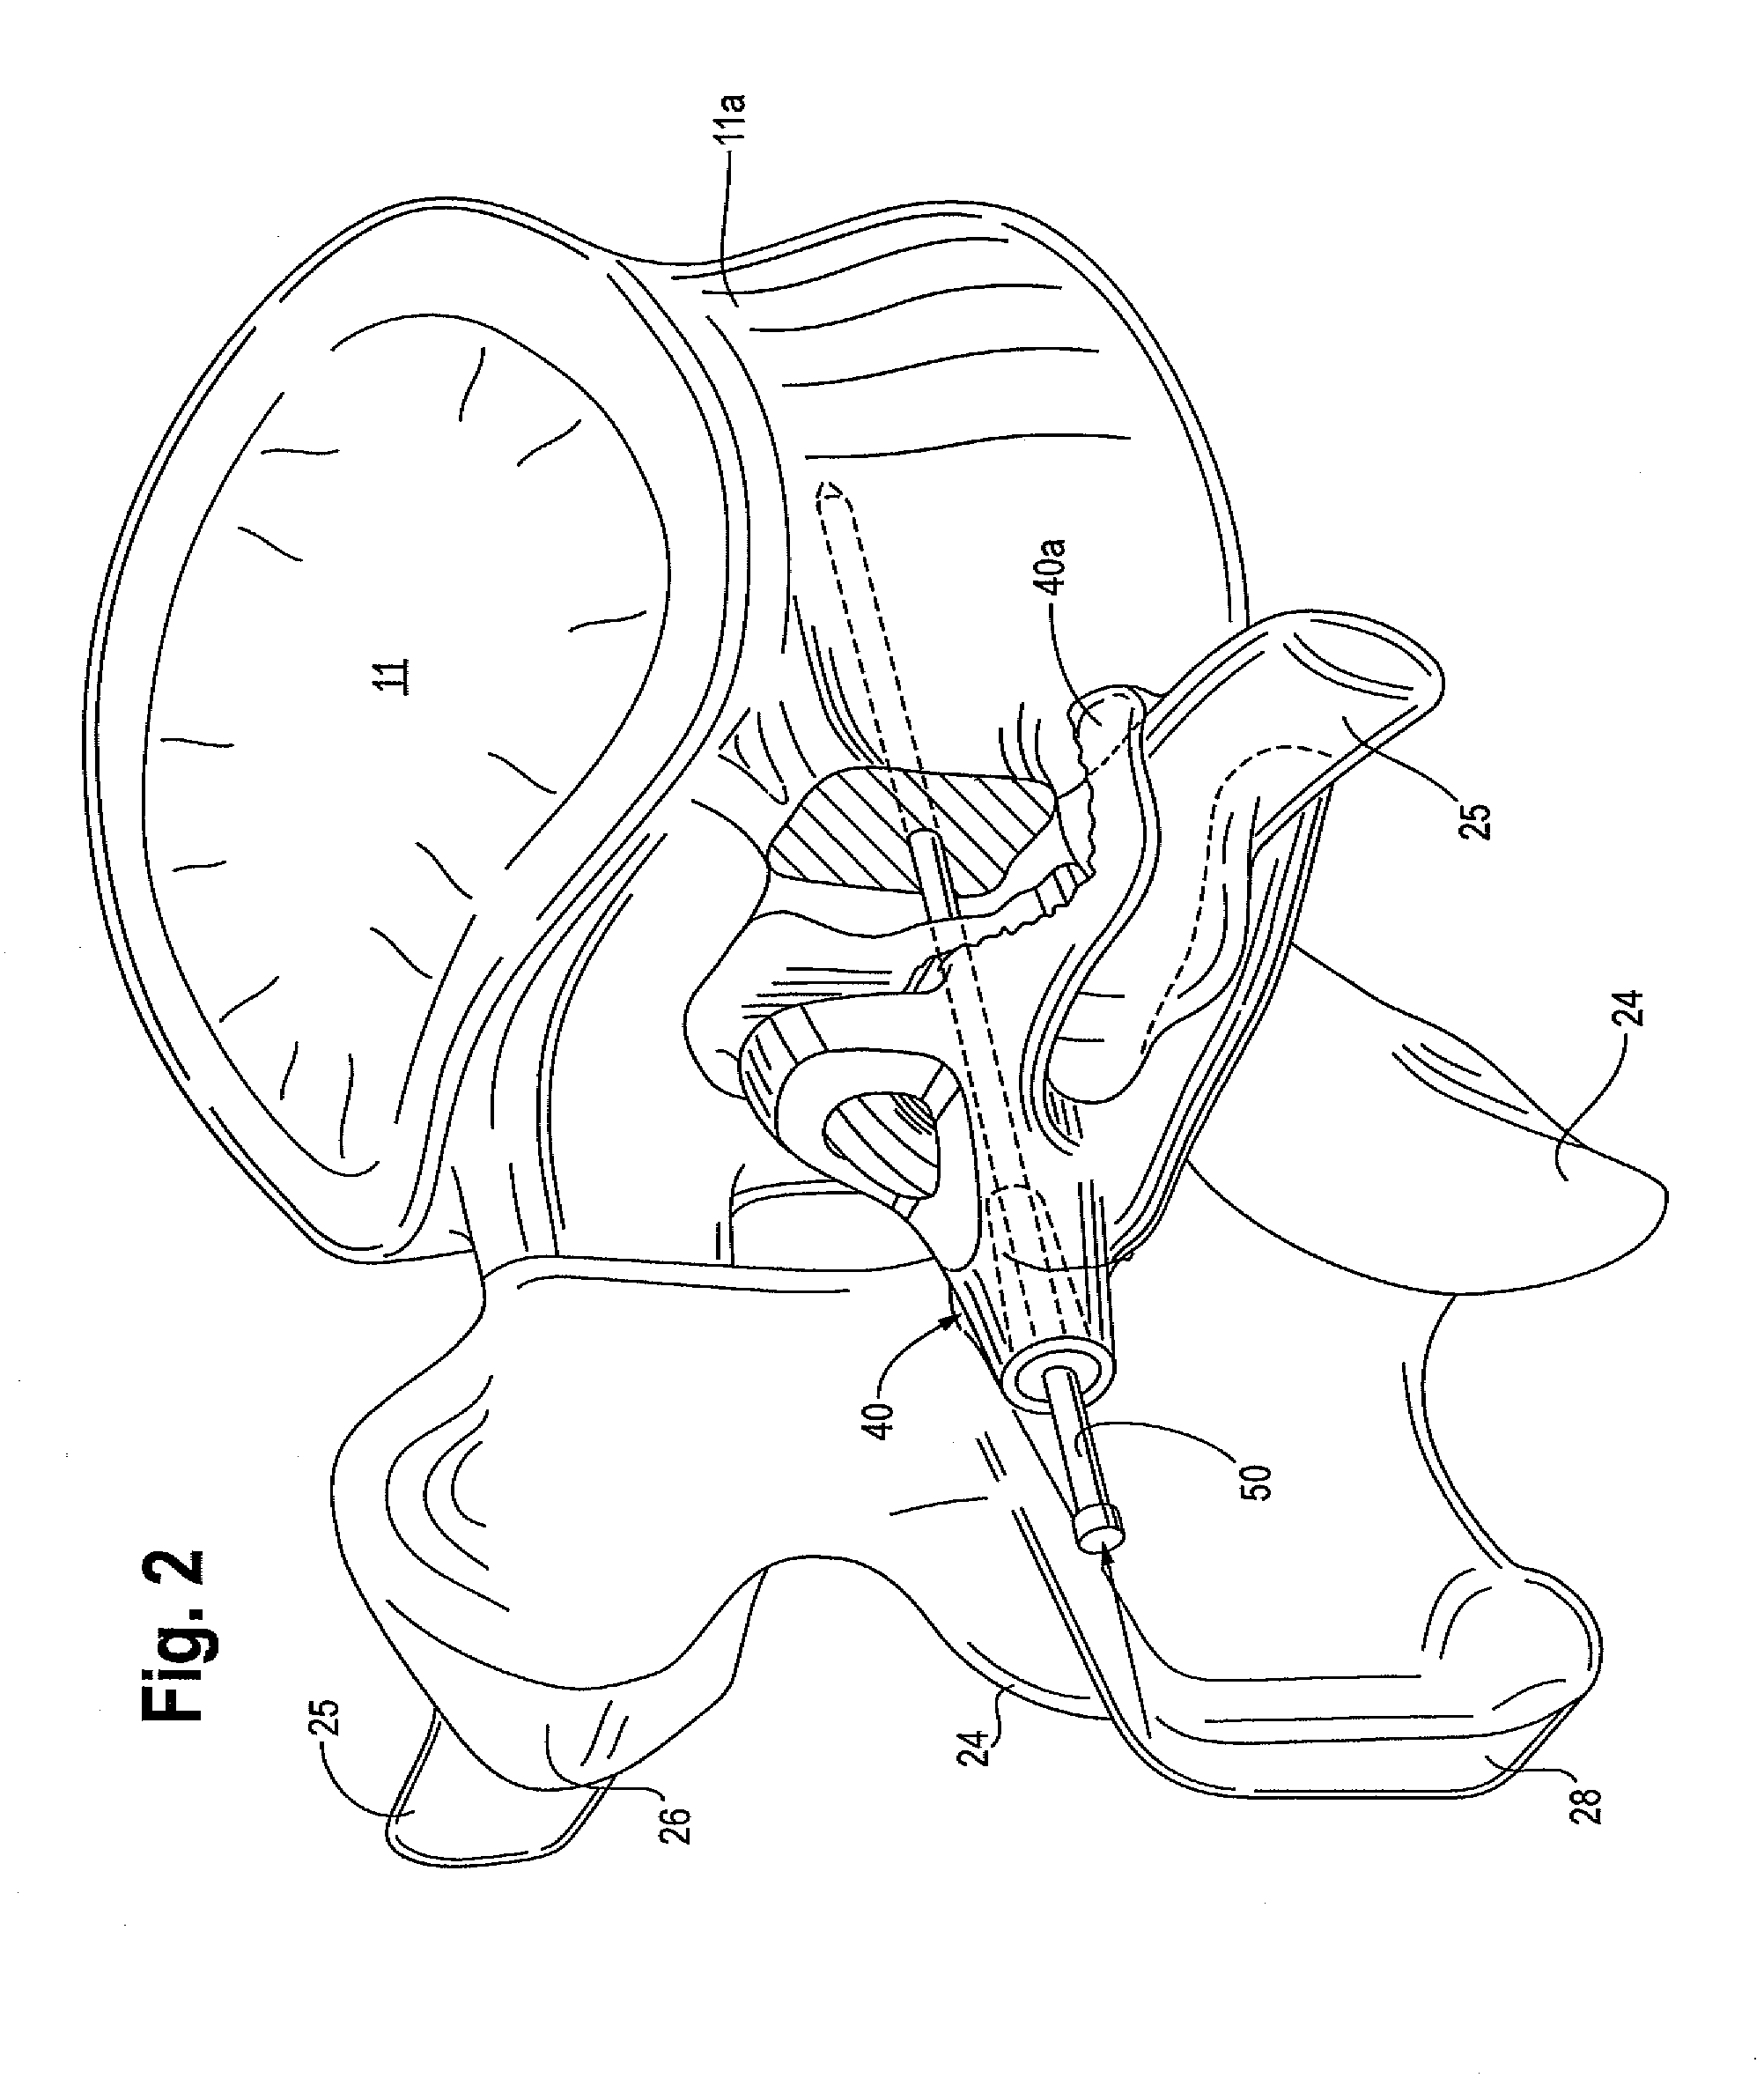 Method for placing spinal implants